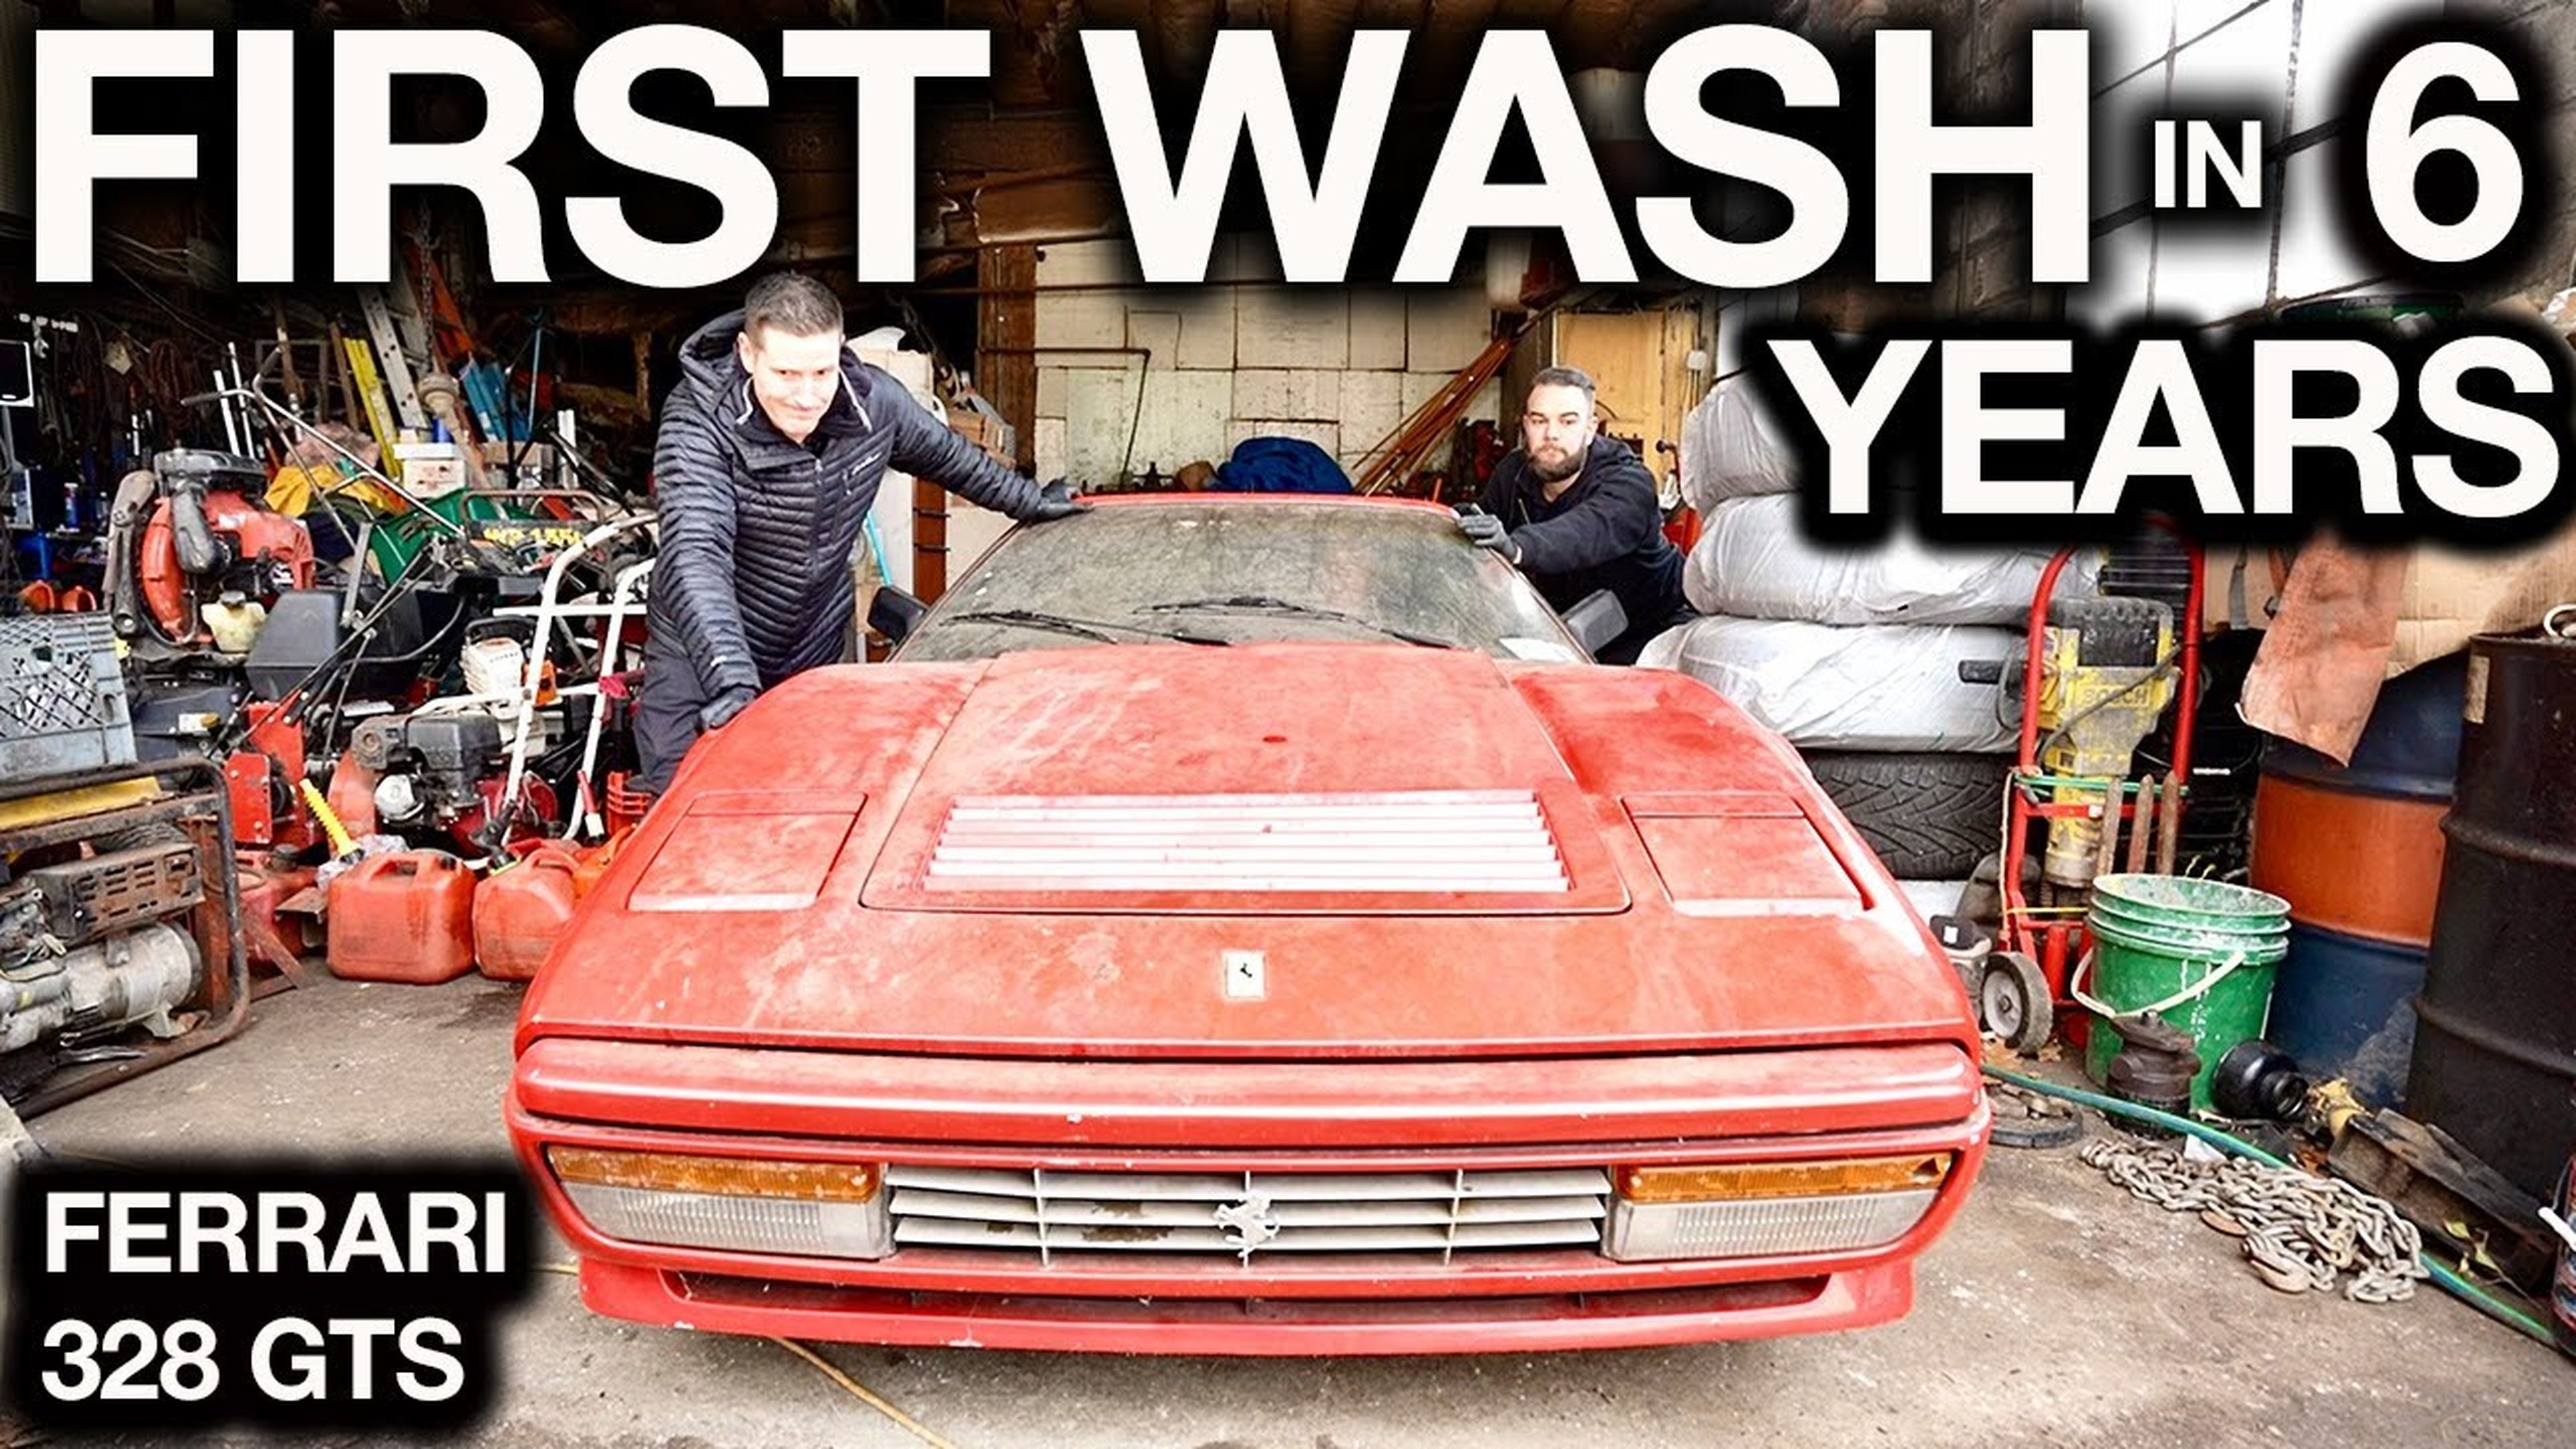 First Wash in 6 Years: Ferrari 328 GTS Disaster Detail